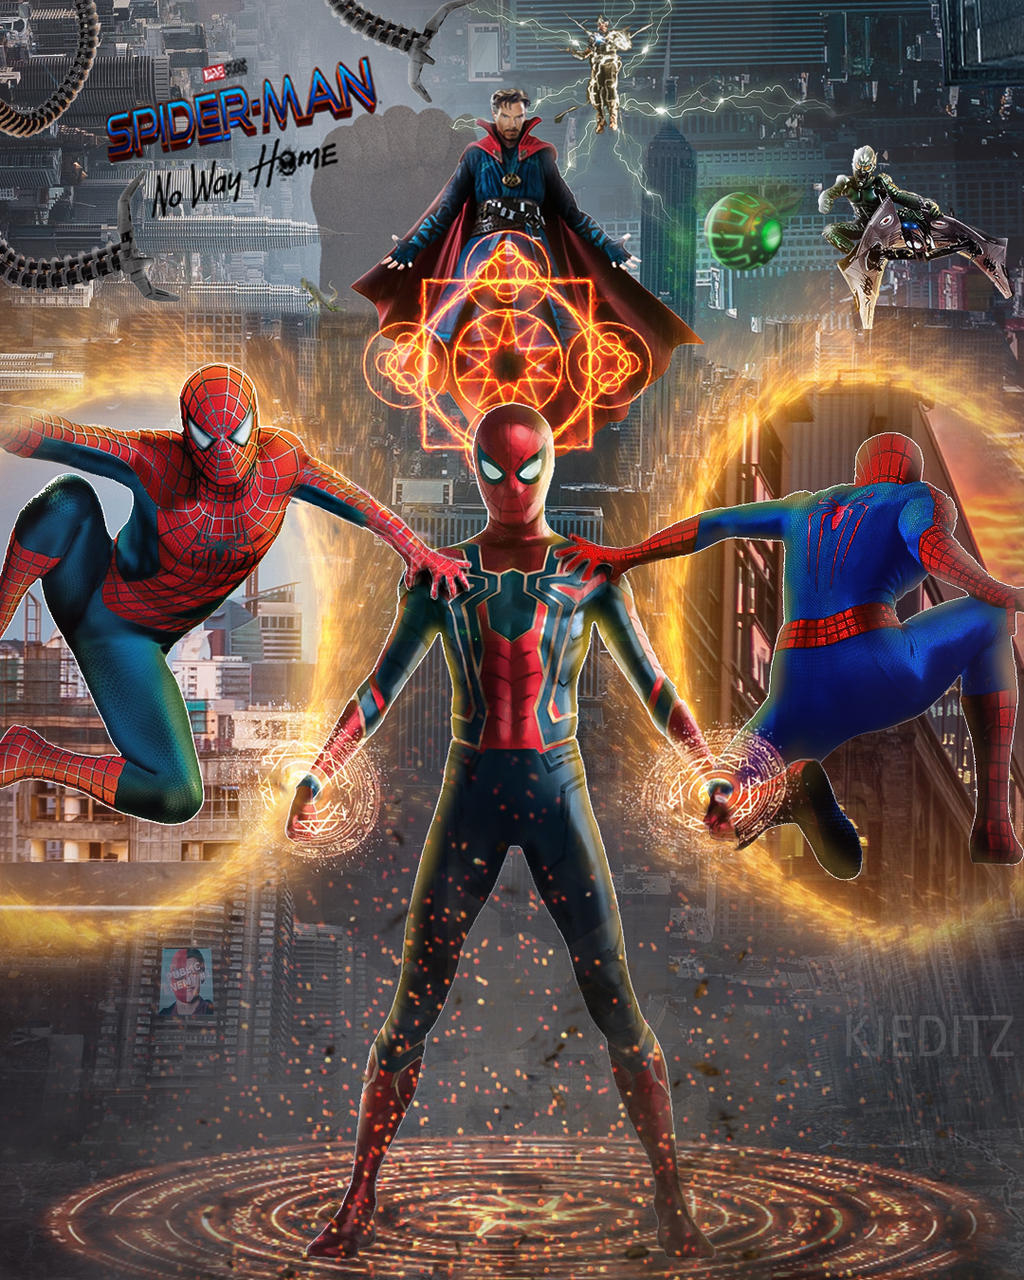 Sony Spider-Man: No Way Home 2021 Wallpapers